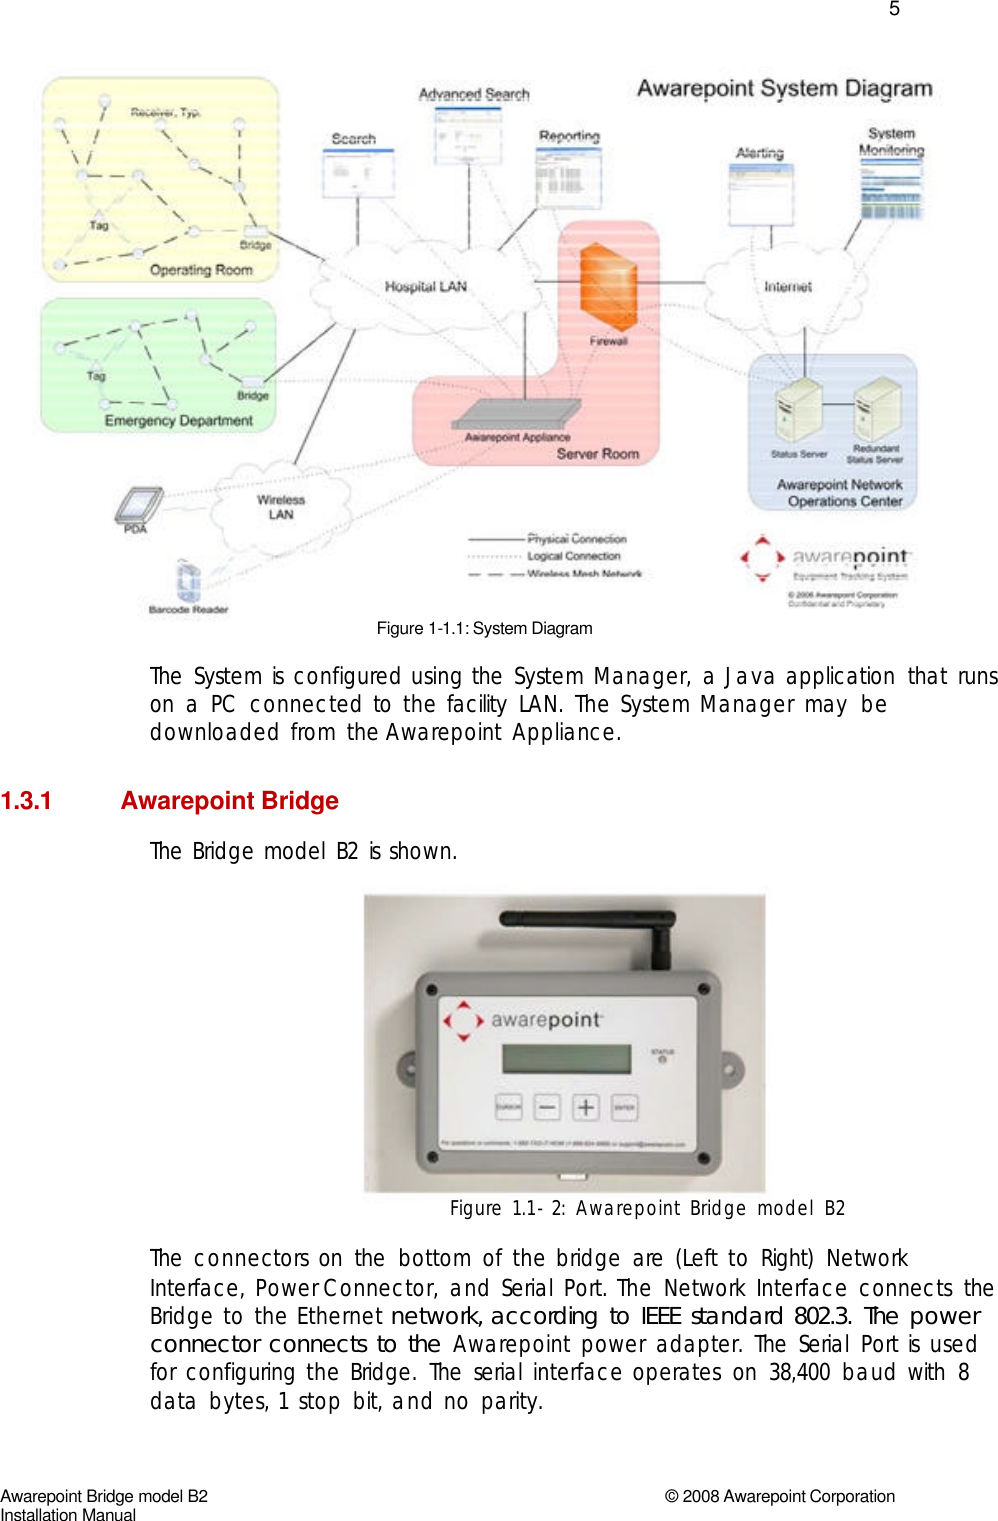   5                                 Figure 1-1.1: System Diagram  The  System  is  configured  using  the  System  Manager,  a  Java  application  that  runs  on  a  PC  connected  to  the  facility  LAN.  The  System  Manager  may  be  downloaded  from  the Awarepoint  Appliance.    1.3.1 Awarepoint Bridge The  Bridge  model  B2  is  shown.                Figure  1.1-2:  Awarepoint  Bridge  model  B2   The  connectors  on  the  bottom  of  the  bridge  are  (Left  to  Right)  Network  Interface,  Power Connector,  and  Serial  Port.  The  Network  Interface  connects  the  Bridge  to  the  Ethernet  network,  according  to  IEEE  standard  802.3.  The  power  connector  connects  to  the  Awarepoint  power  adapter.  The  Serial  Port  is  used  for  configuring  the  Bridge.  The  serial  interface  operates  on  38,400  baud  with  8  data  bytes,  1  stop  bit,  and  no  parity.      Awarepoint Bridge model B2 © 2008 Awarepoint Corporation Installation Manual  